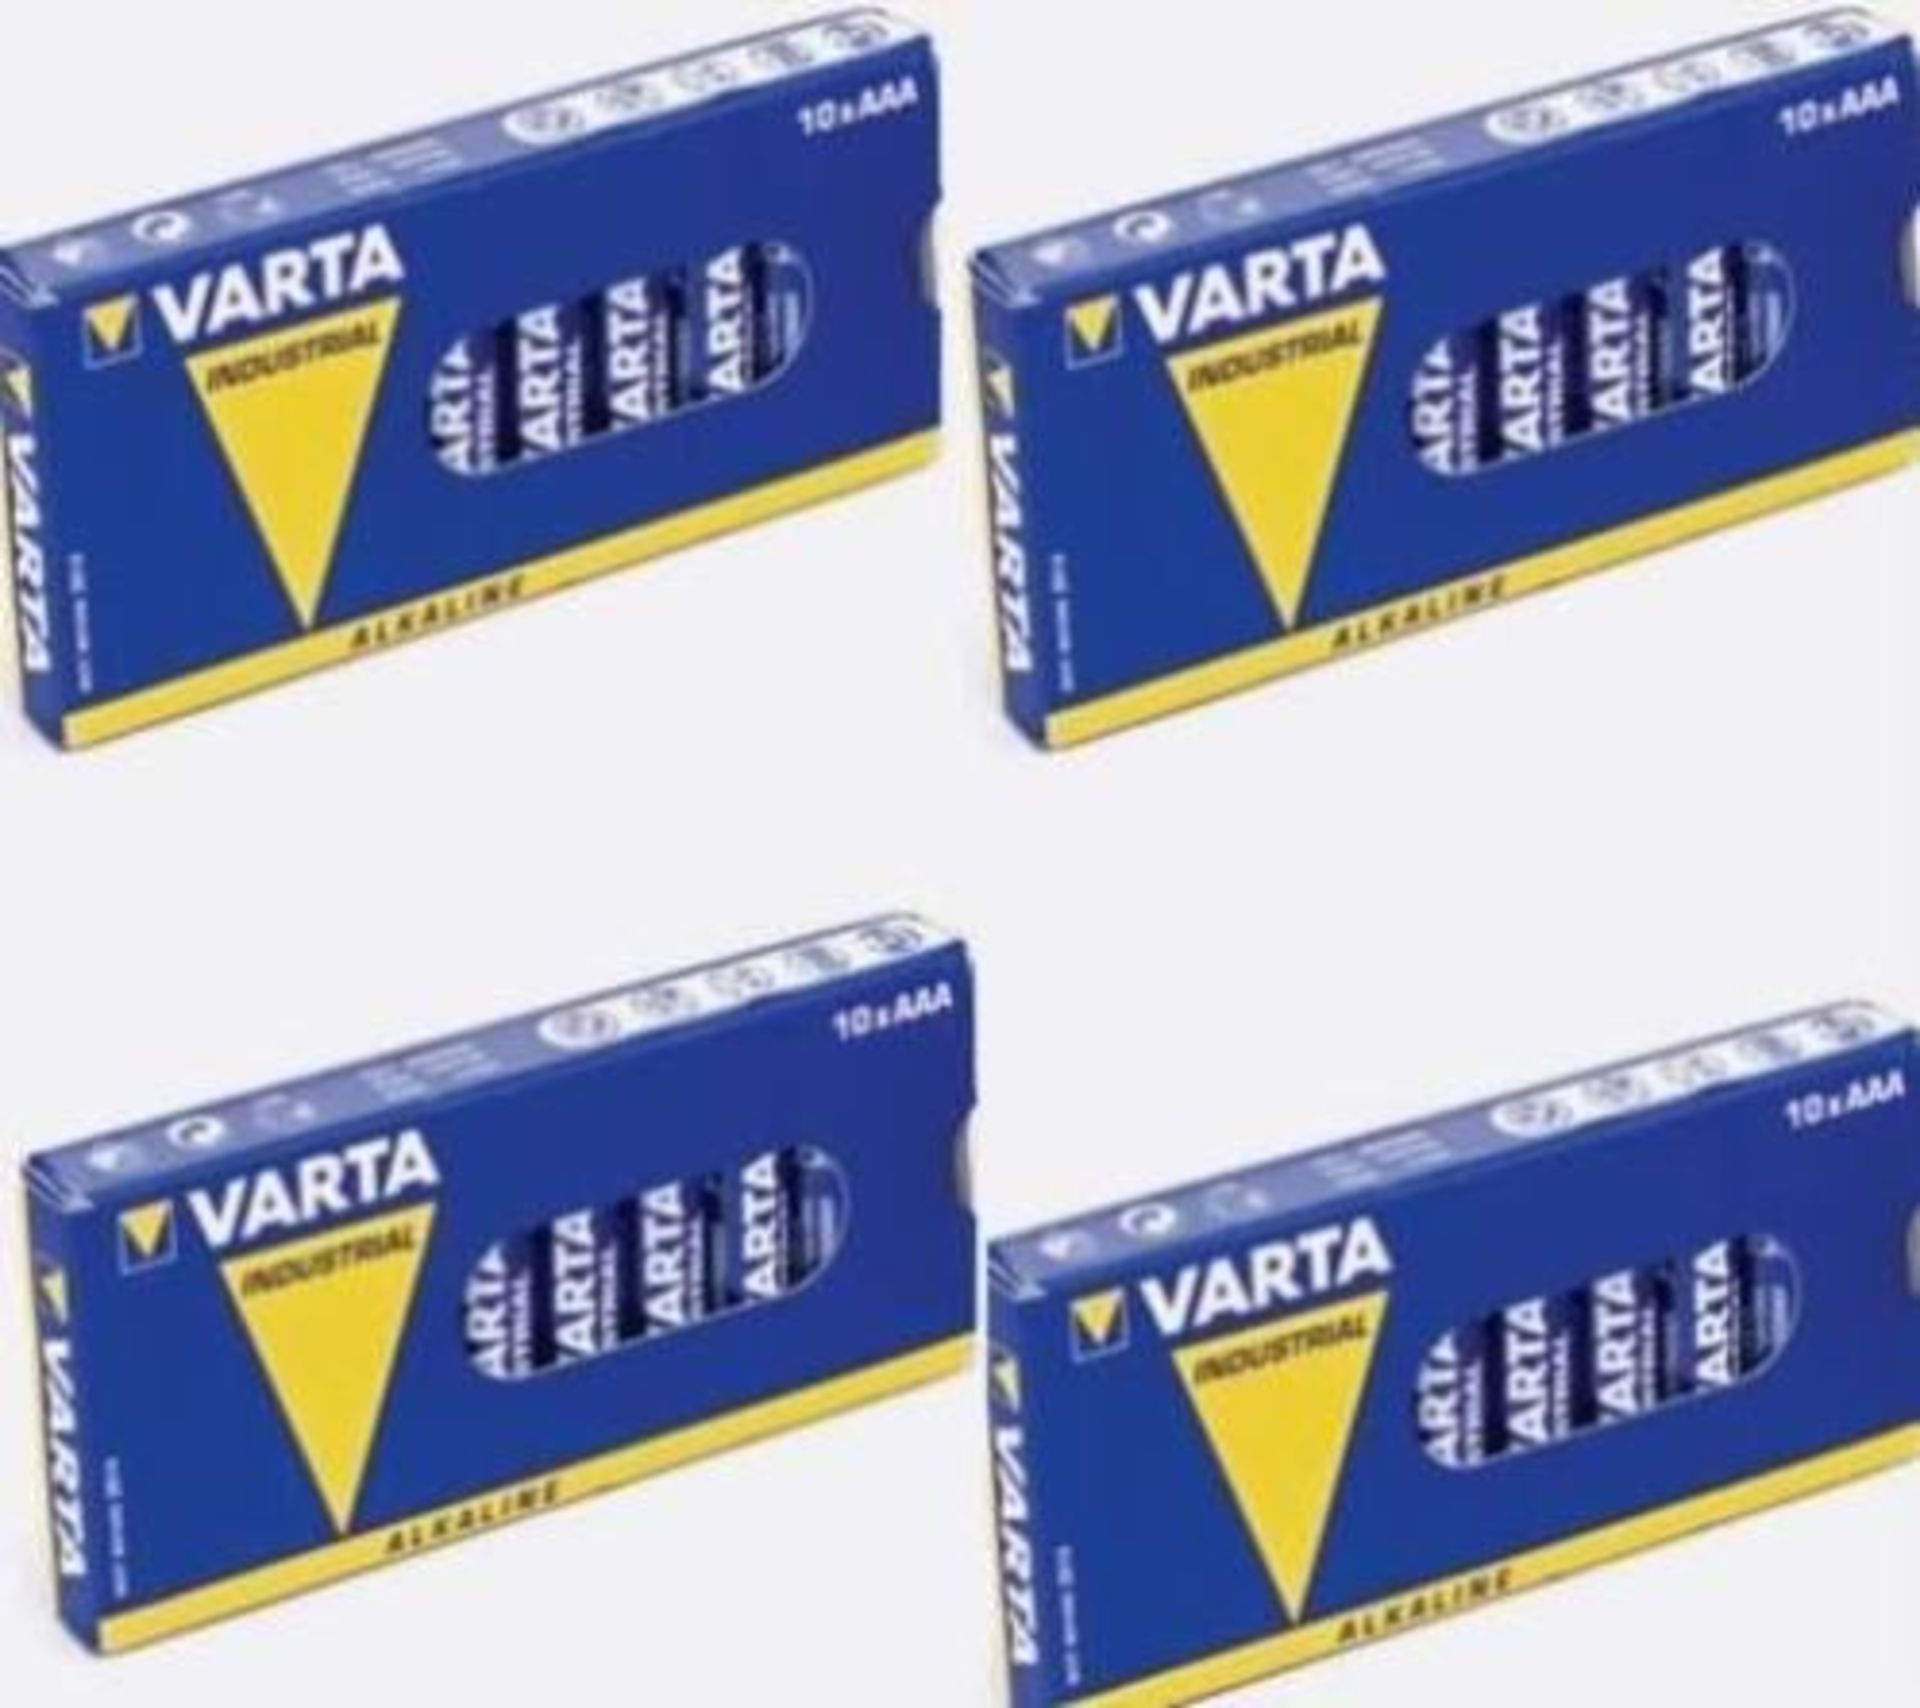 V *TRADE QTY* Brand New Four Packs Of 10 AAA Varta Industrial Batteries X 4 YOUR BID PRICE TO BE